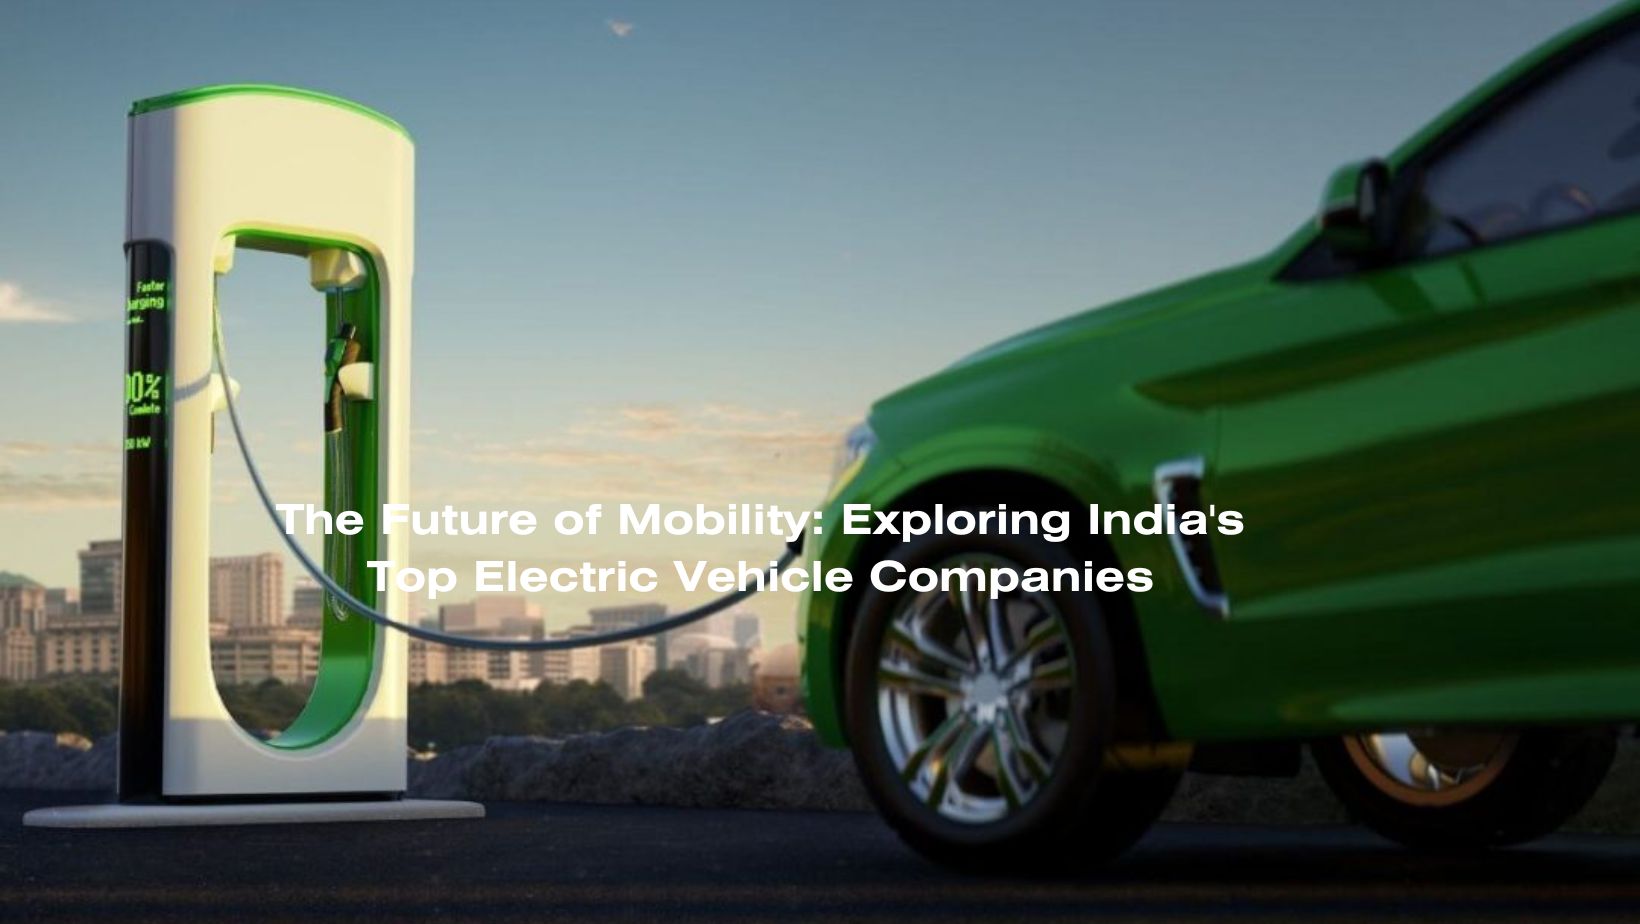 The Future of Mobility: Exploring India’s Top Electric Vehicle Companies